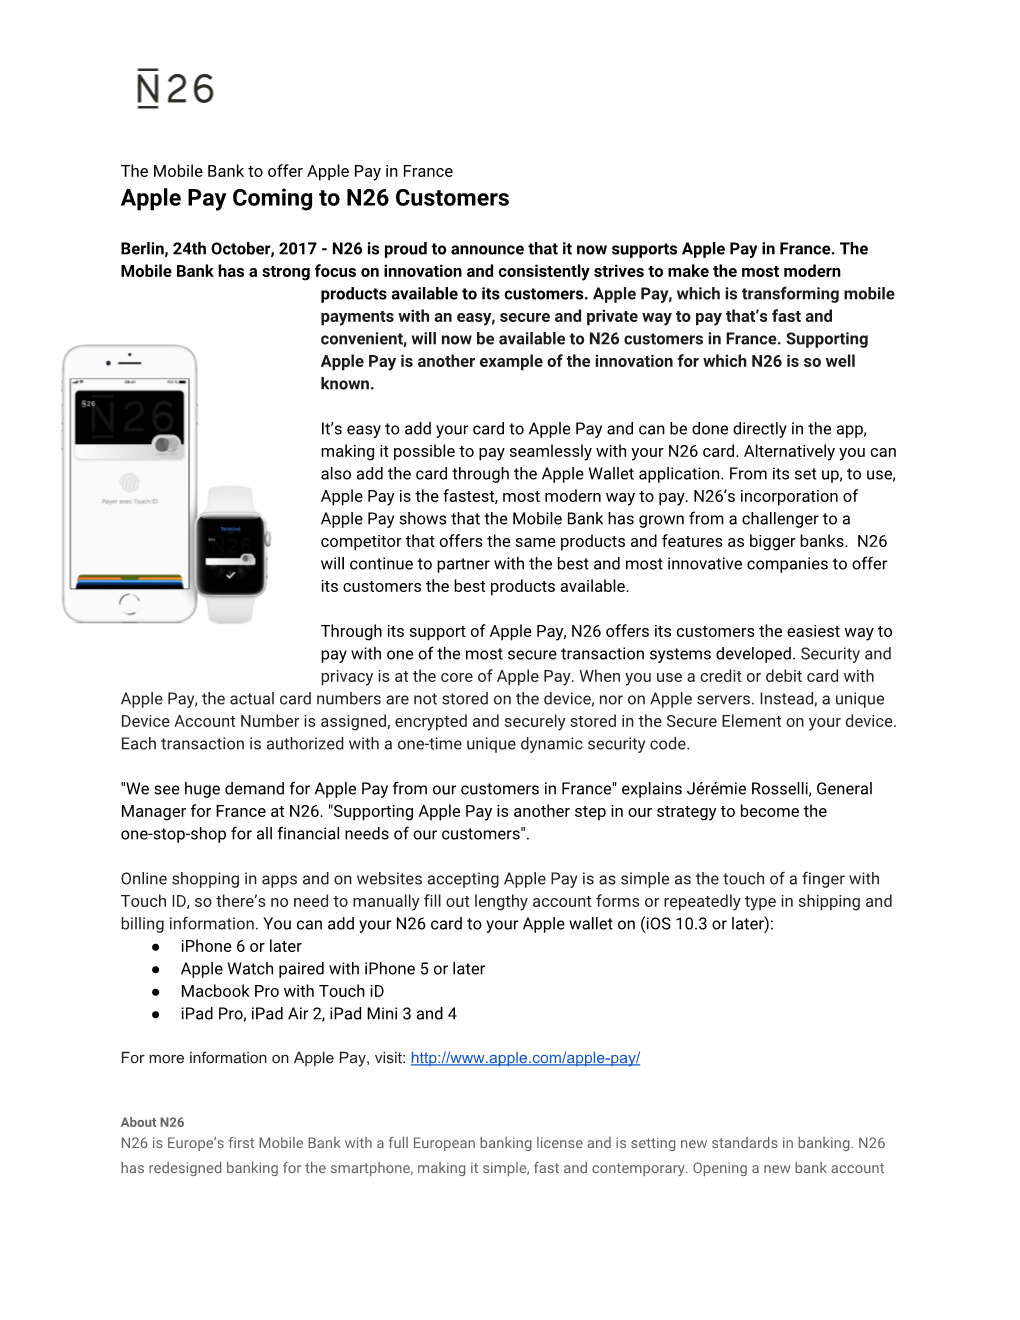 Apple​​Pay​​Coming​​To​​N26​​Customers